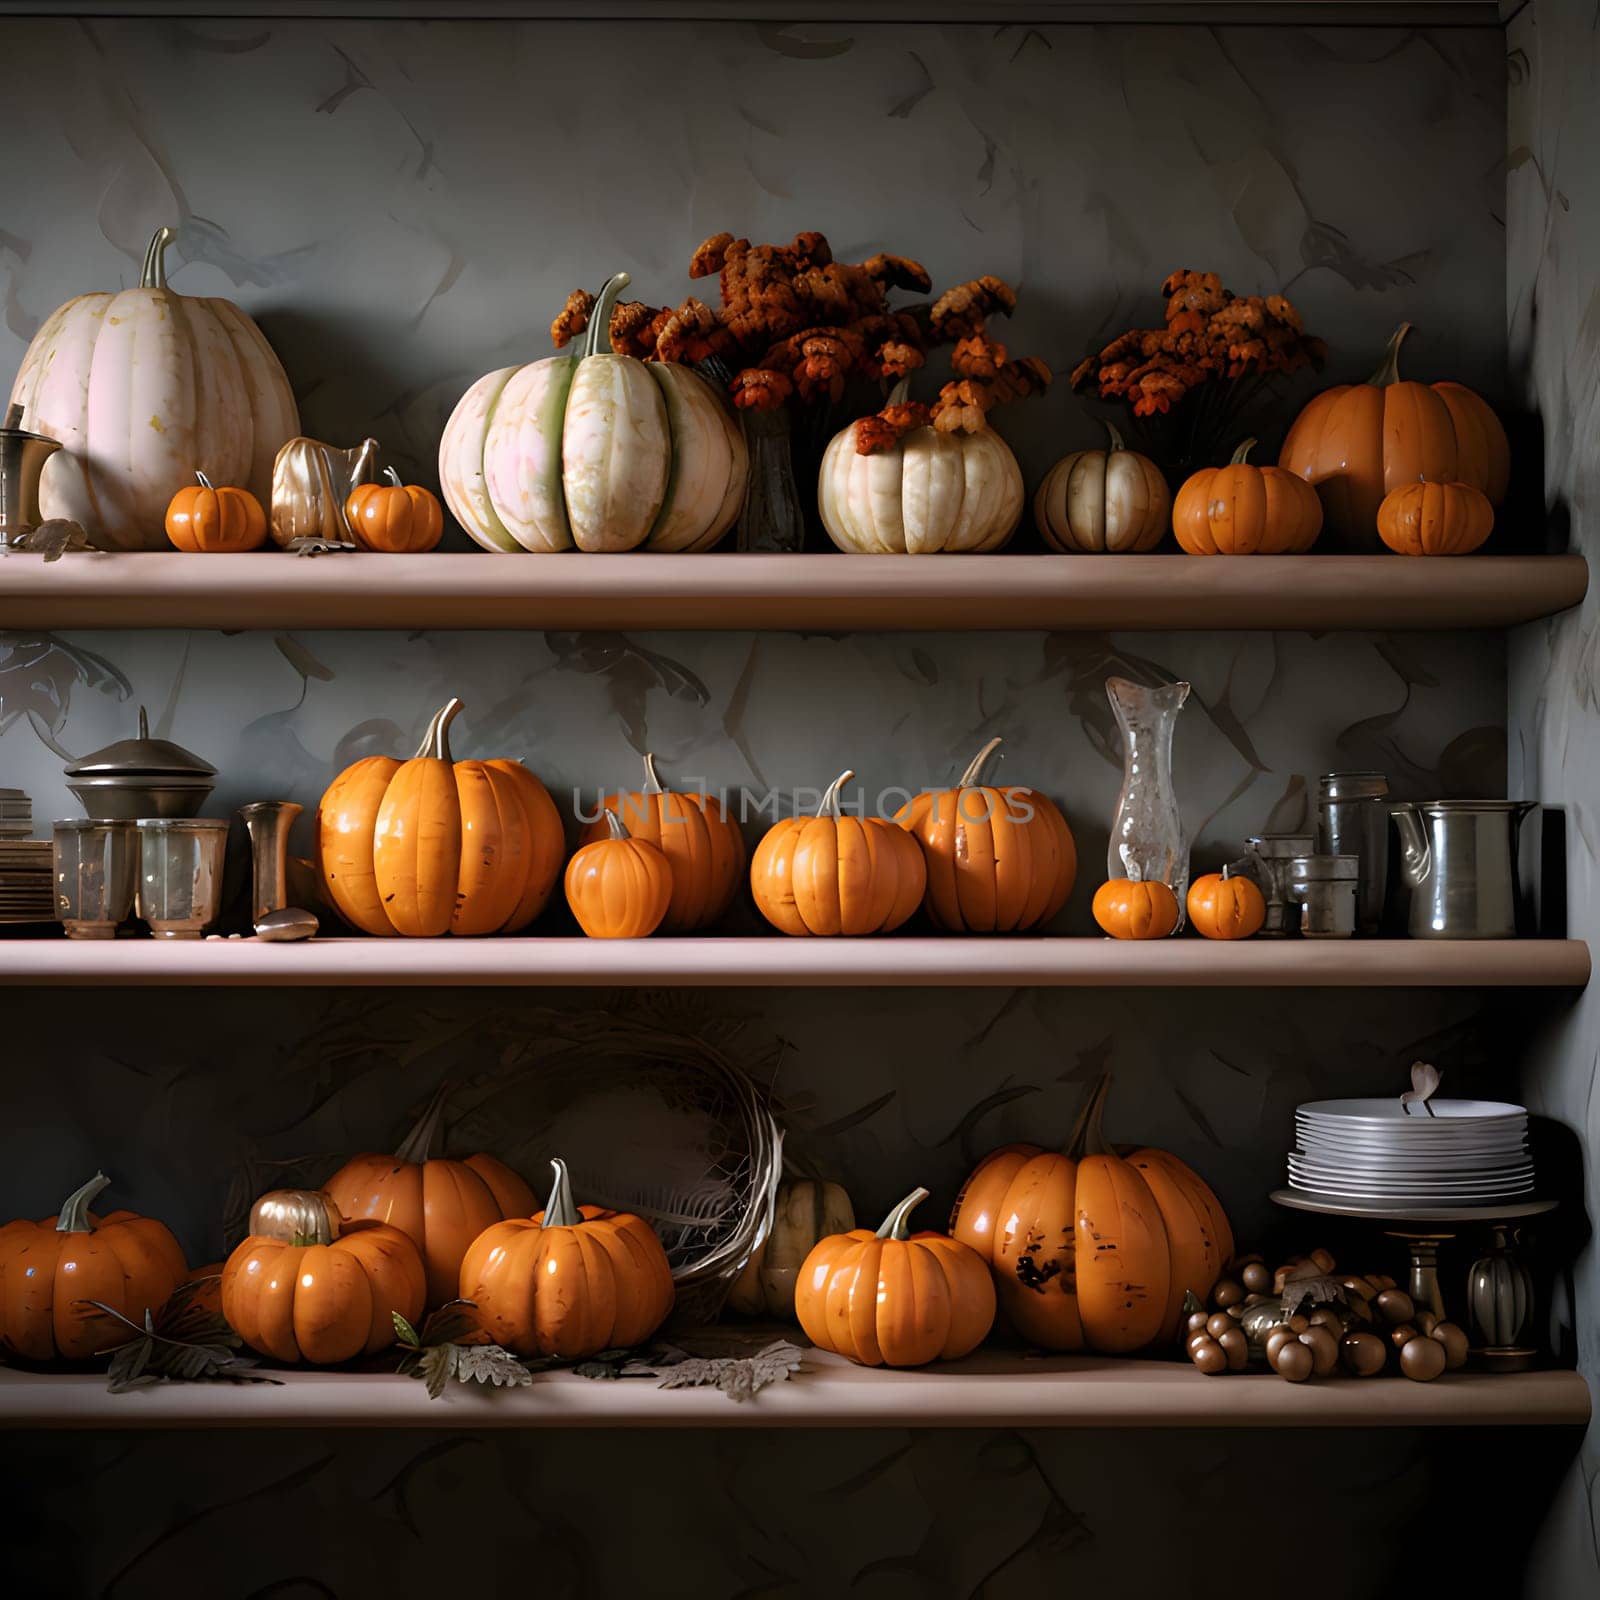 Three shelves in the house, and on them different types, sizes, colors of pumpkins and flowers. Pumpkin as a dish of thanksgiving for the harvest. An atmosphere of joy and celebration.